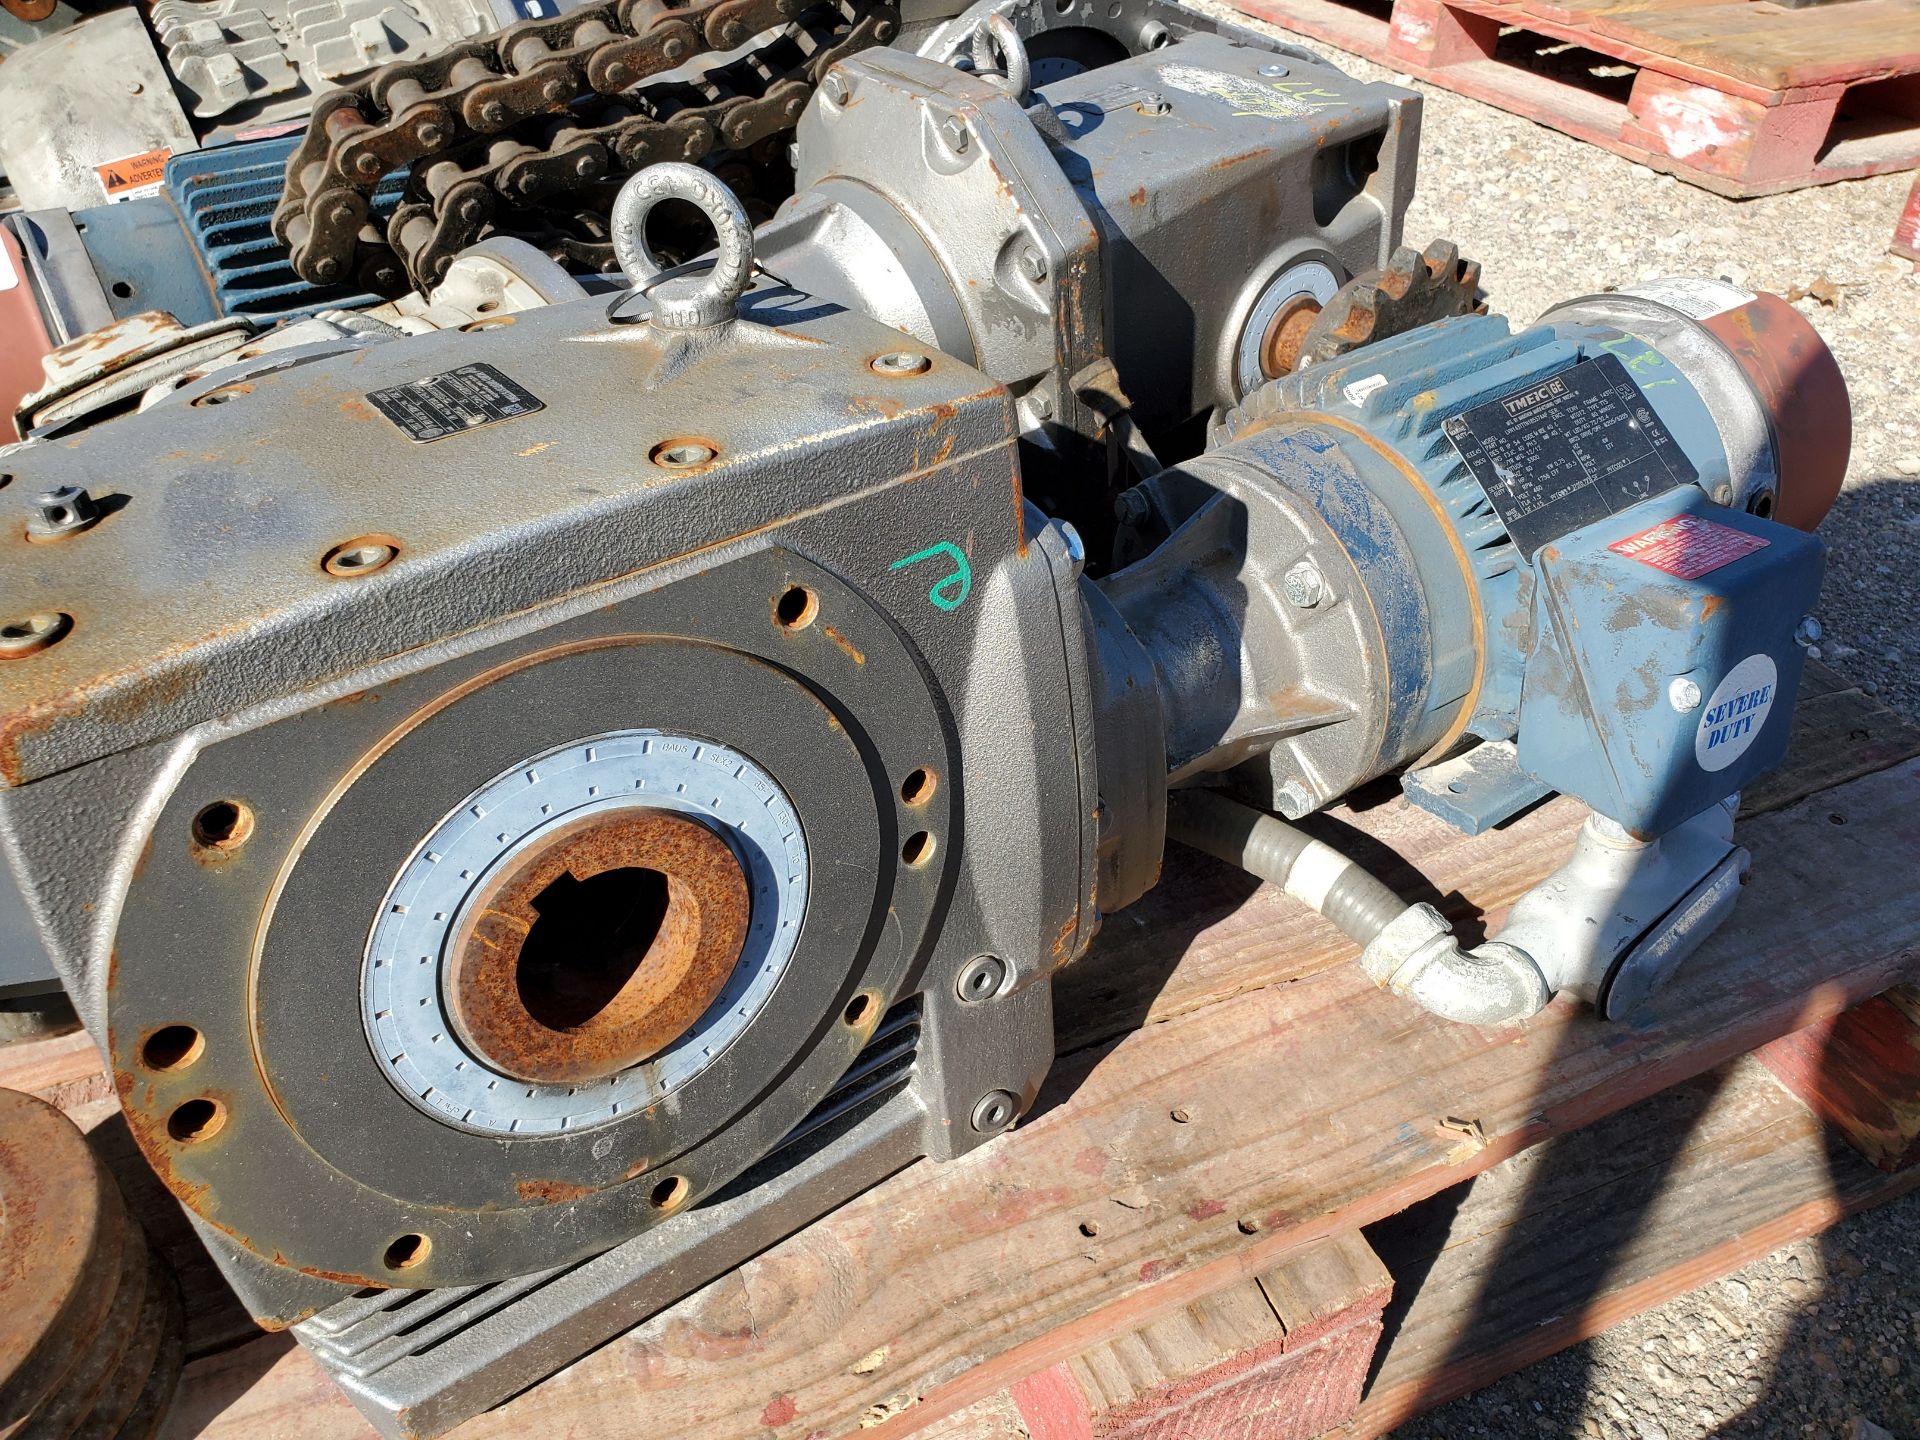 (4) NORD DRIVESYSTEMS 25.39:1 GEAR REDUCERS WITH GE 1 HP ELECTRIC MOTORS - Image 5 of 9